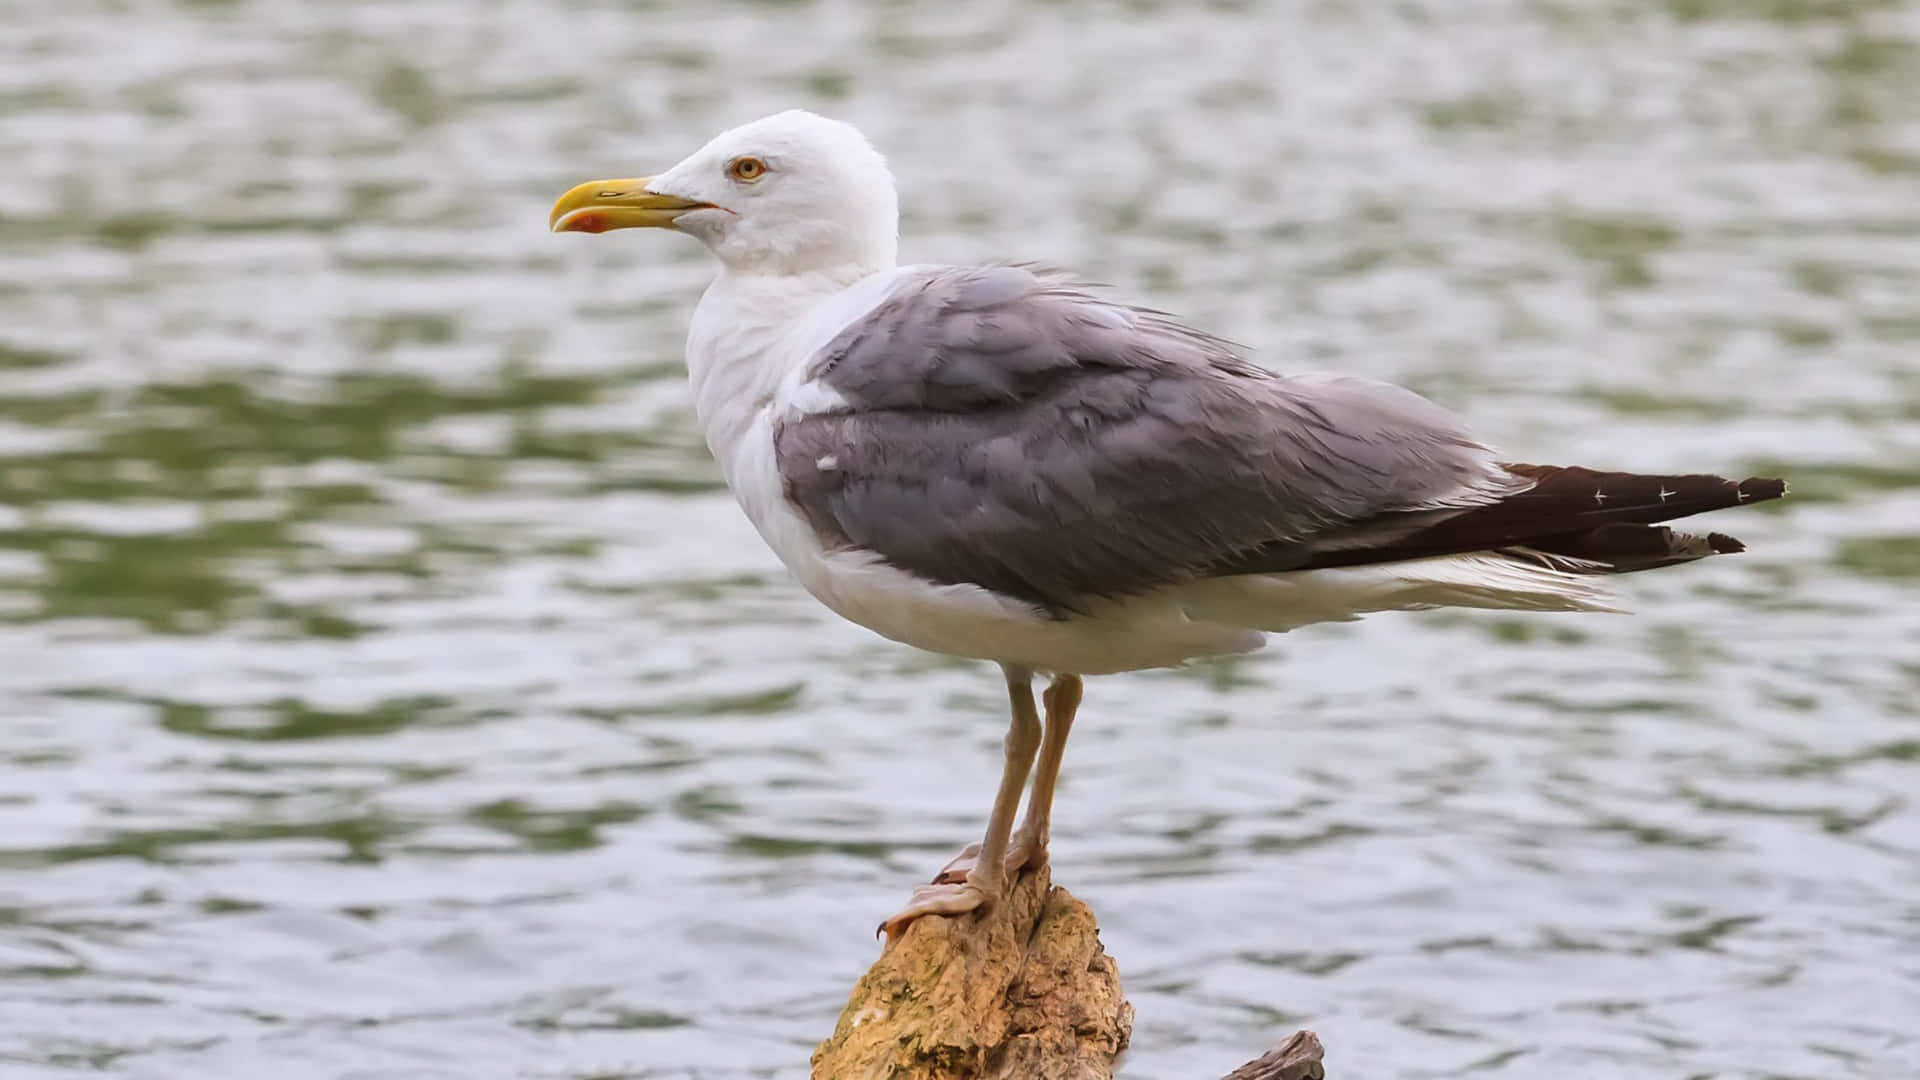 Seagull Perched By Water.jpg Wallpaper